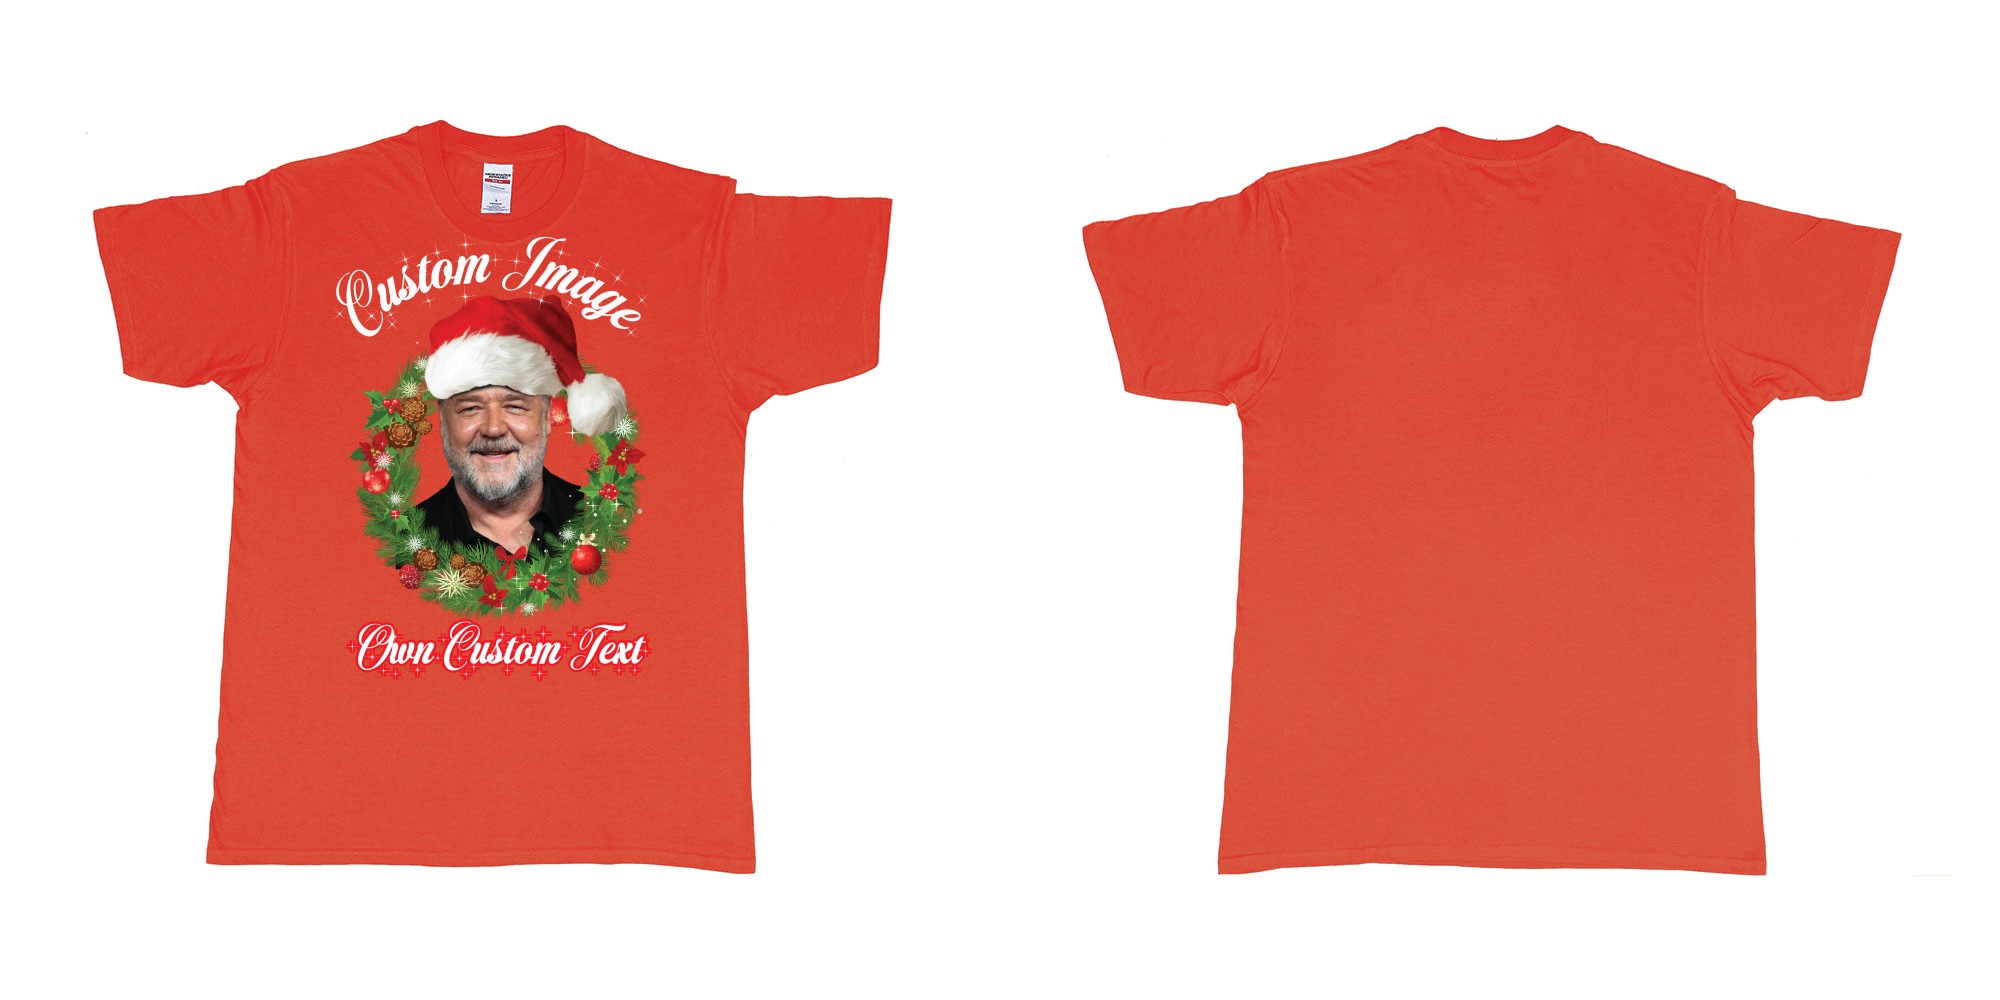 Custom tshirt design christmas wreath custom face image text in fabric color red choice your own text made in Bali by The Pirate Way